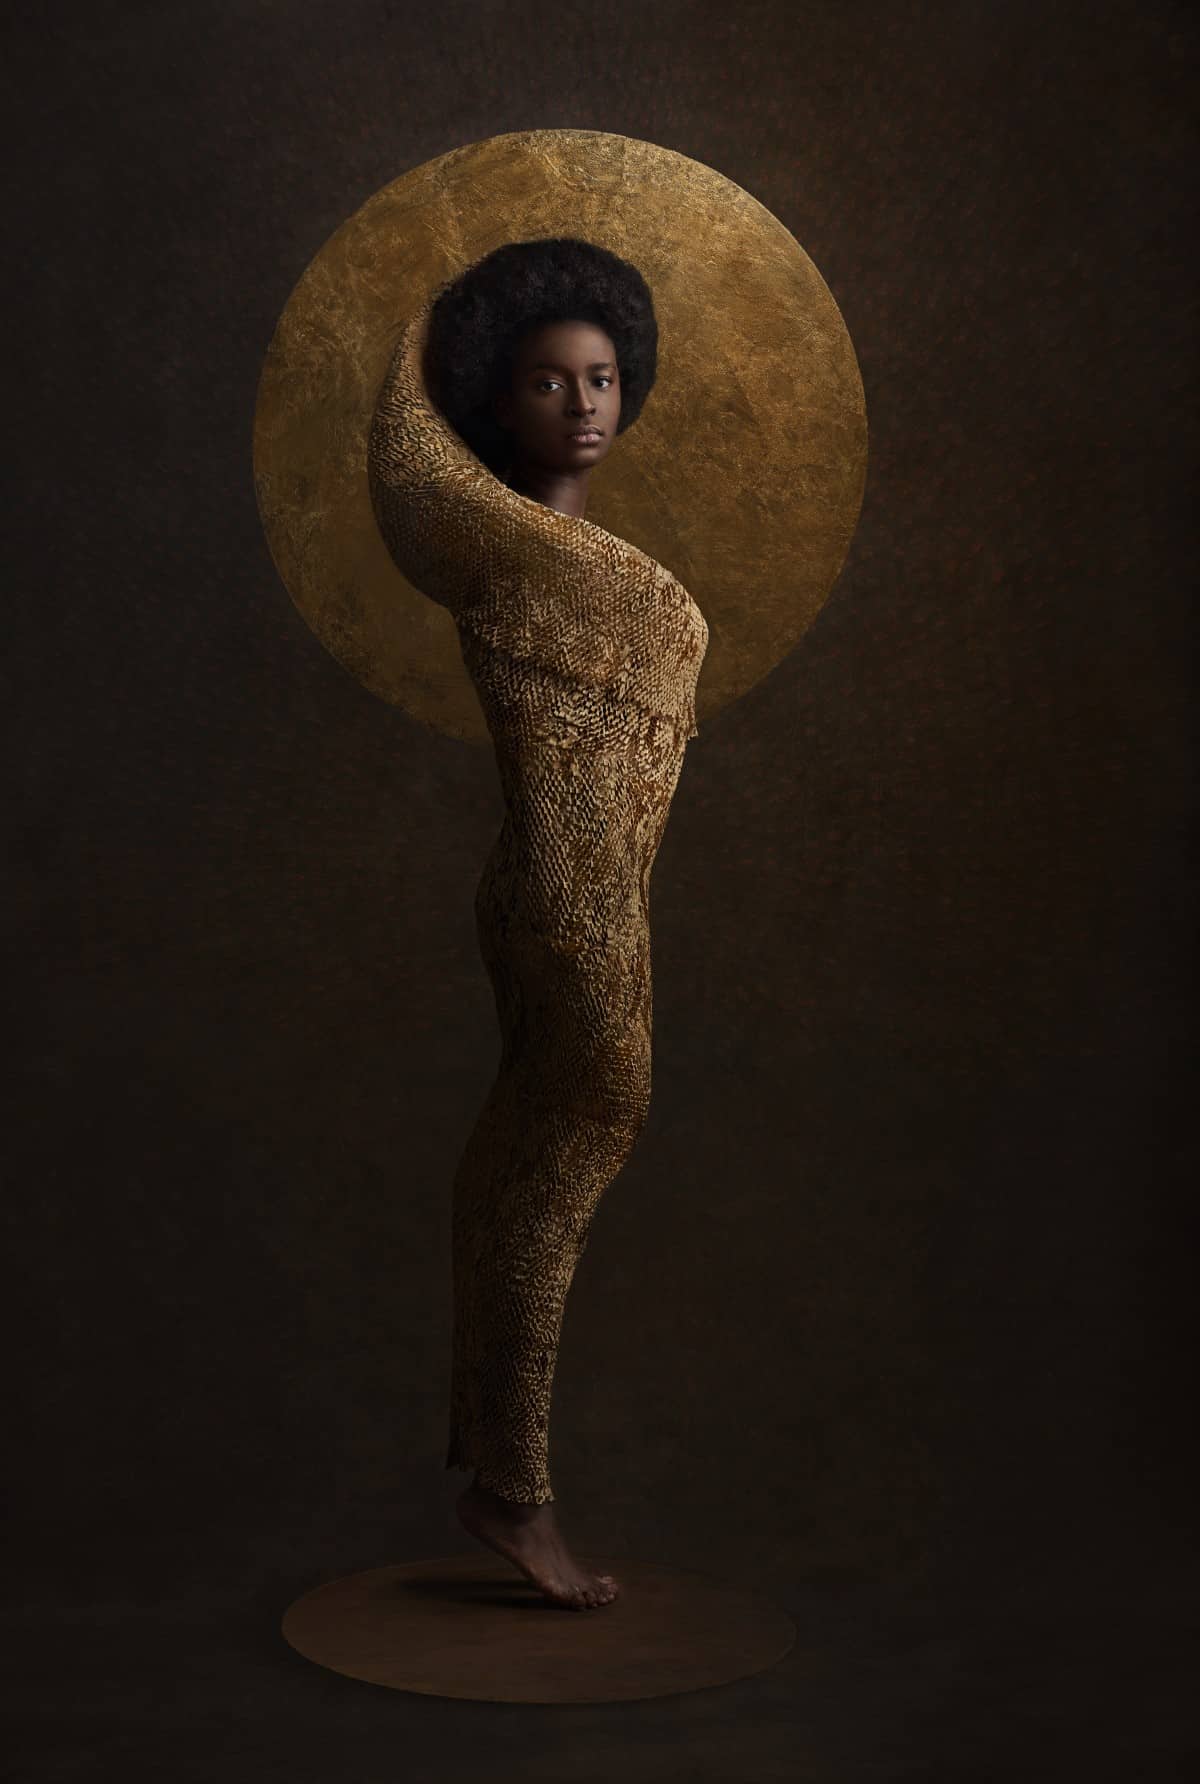 Portrait of a Black Woman Wrapped in Clothe